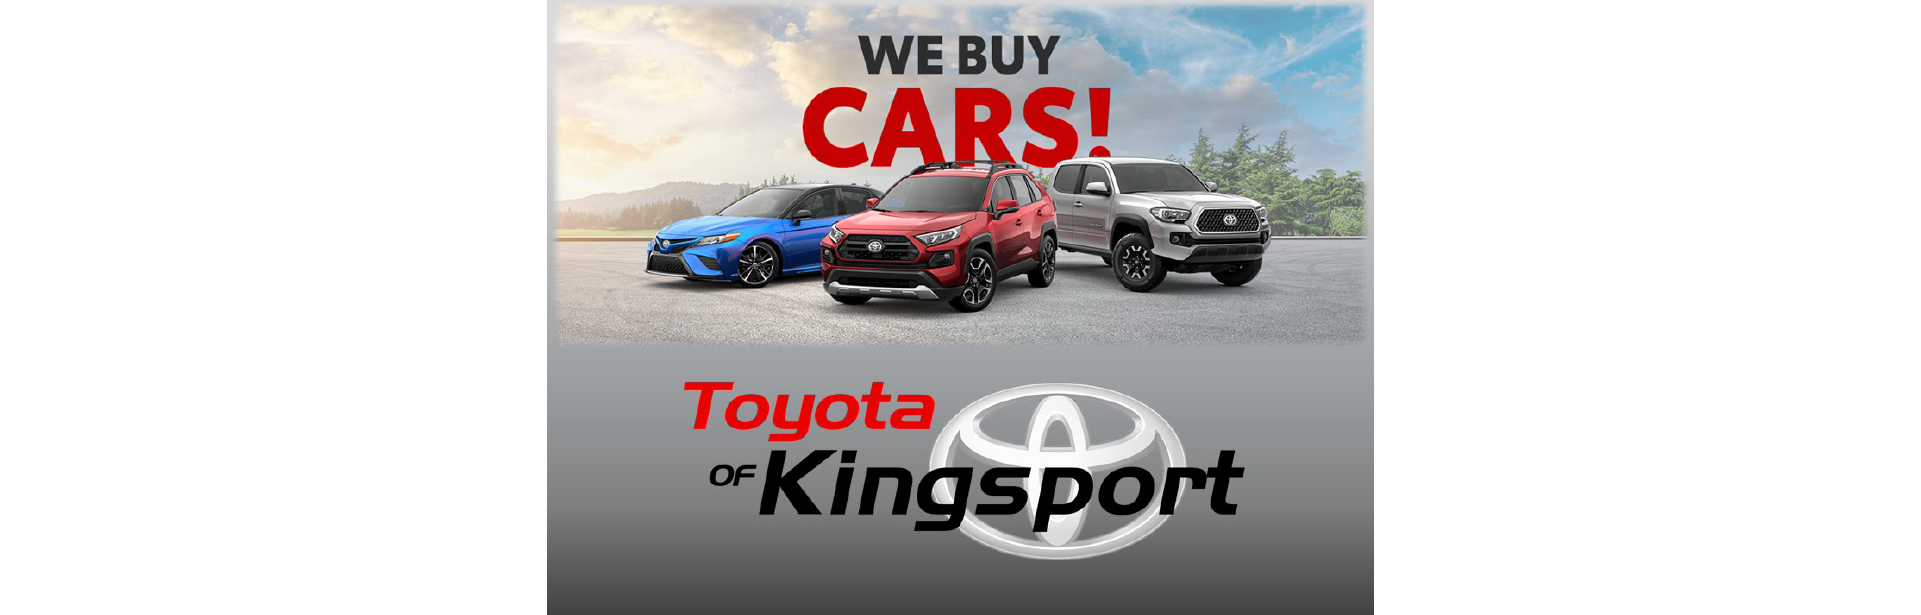 Sell Us Your Car in Kingsport, TN - Toyota of Kingsport